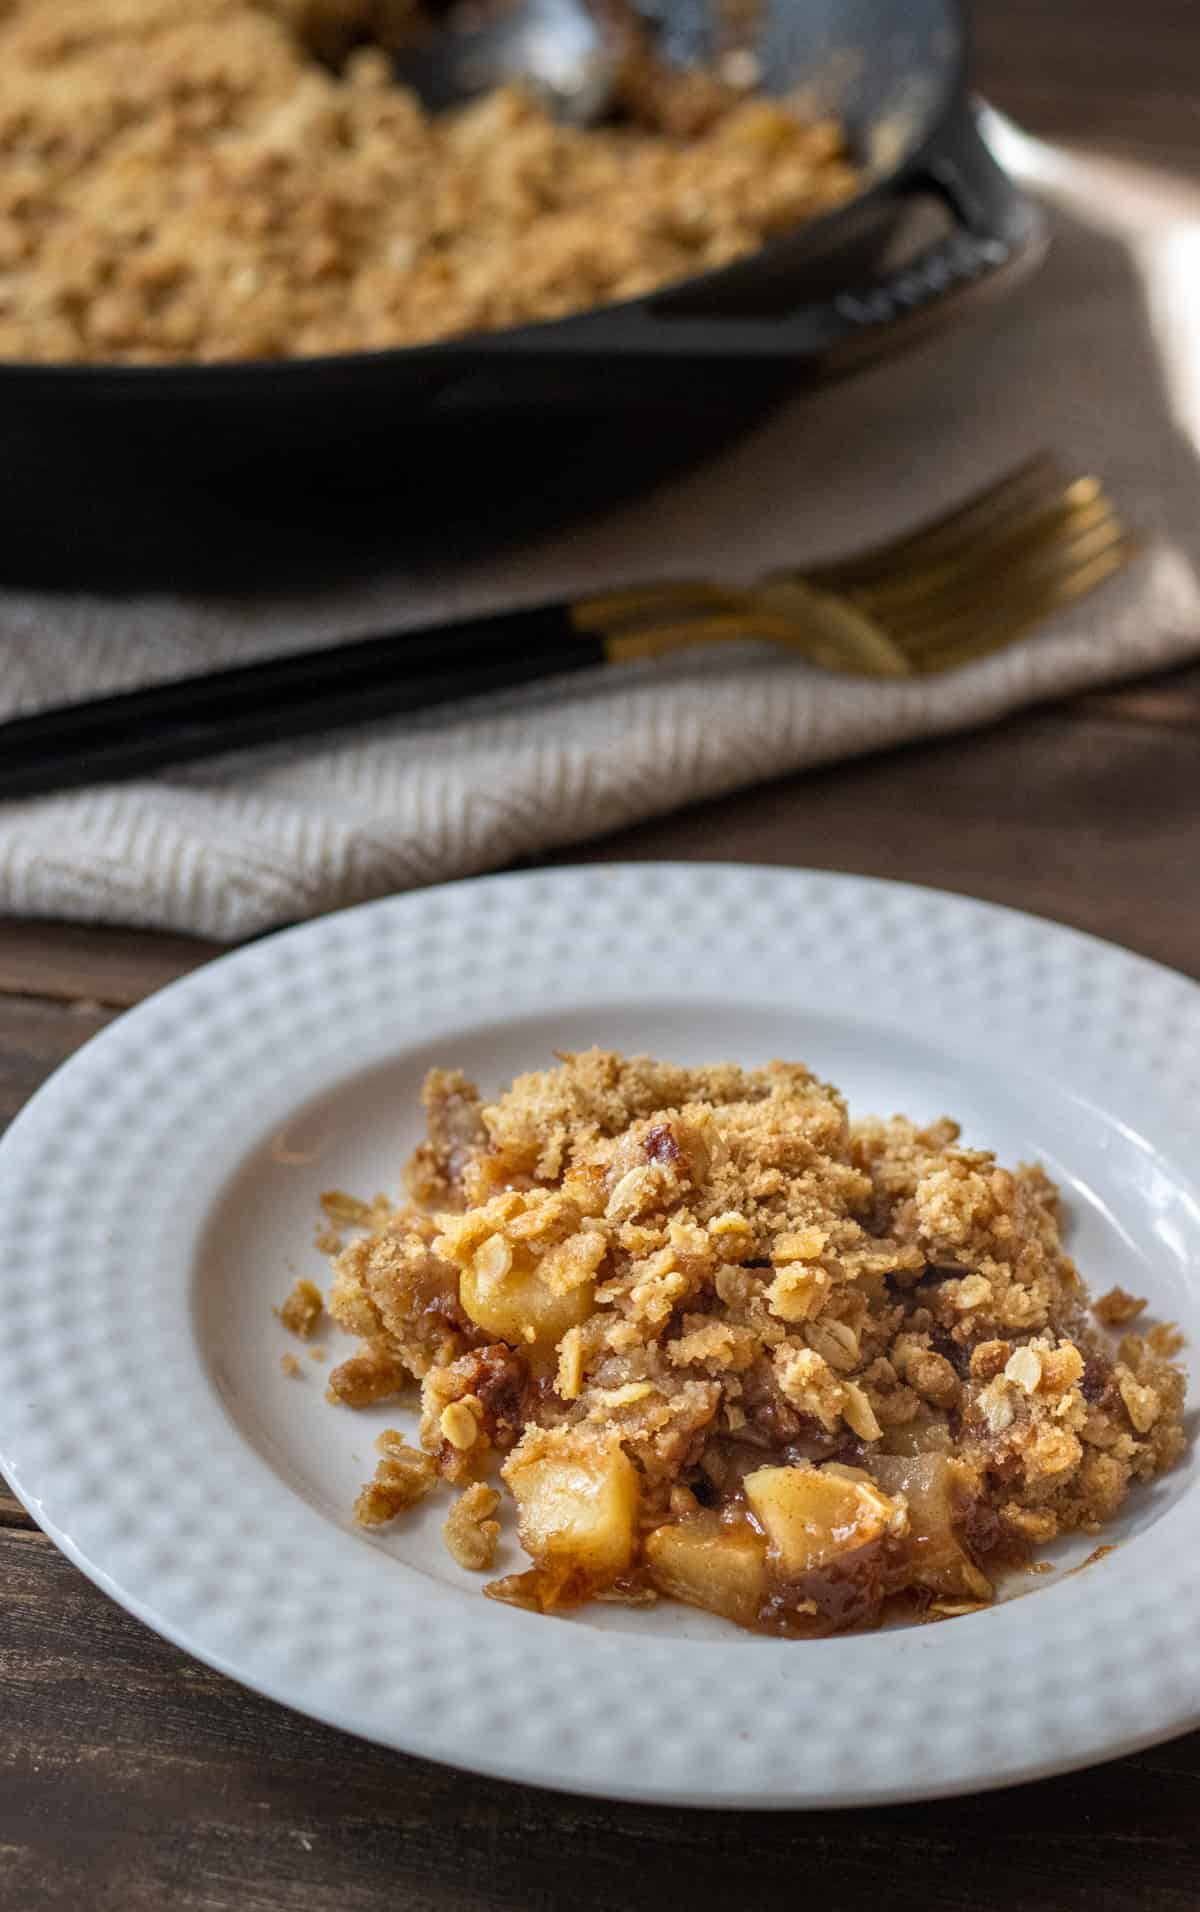 Plate with a scoop of apple crisp and the rest of the crisp in the background with two forks.